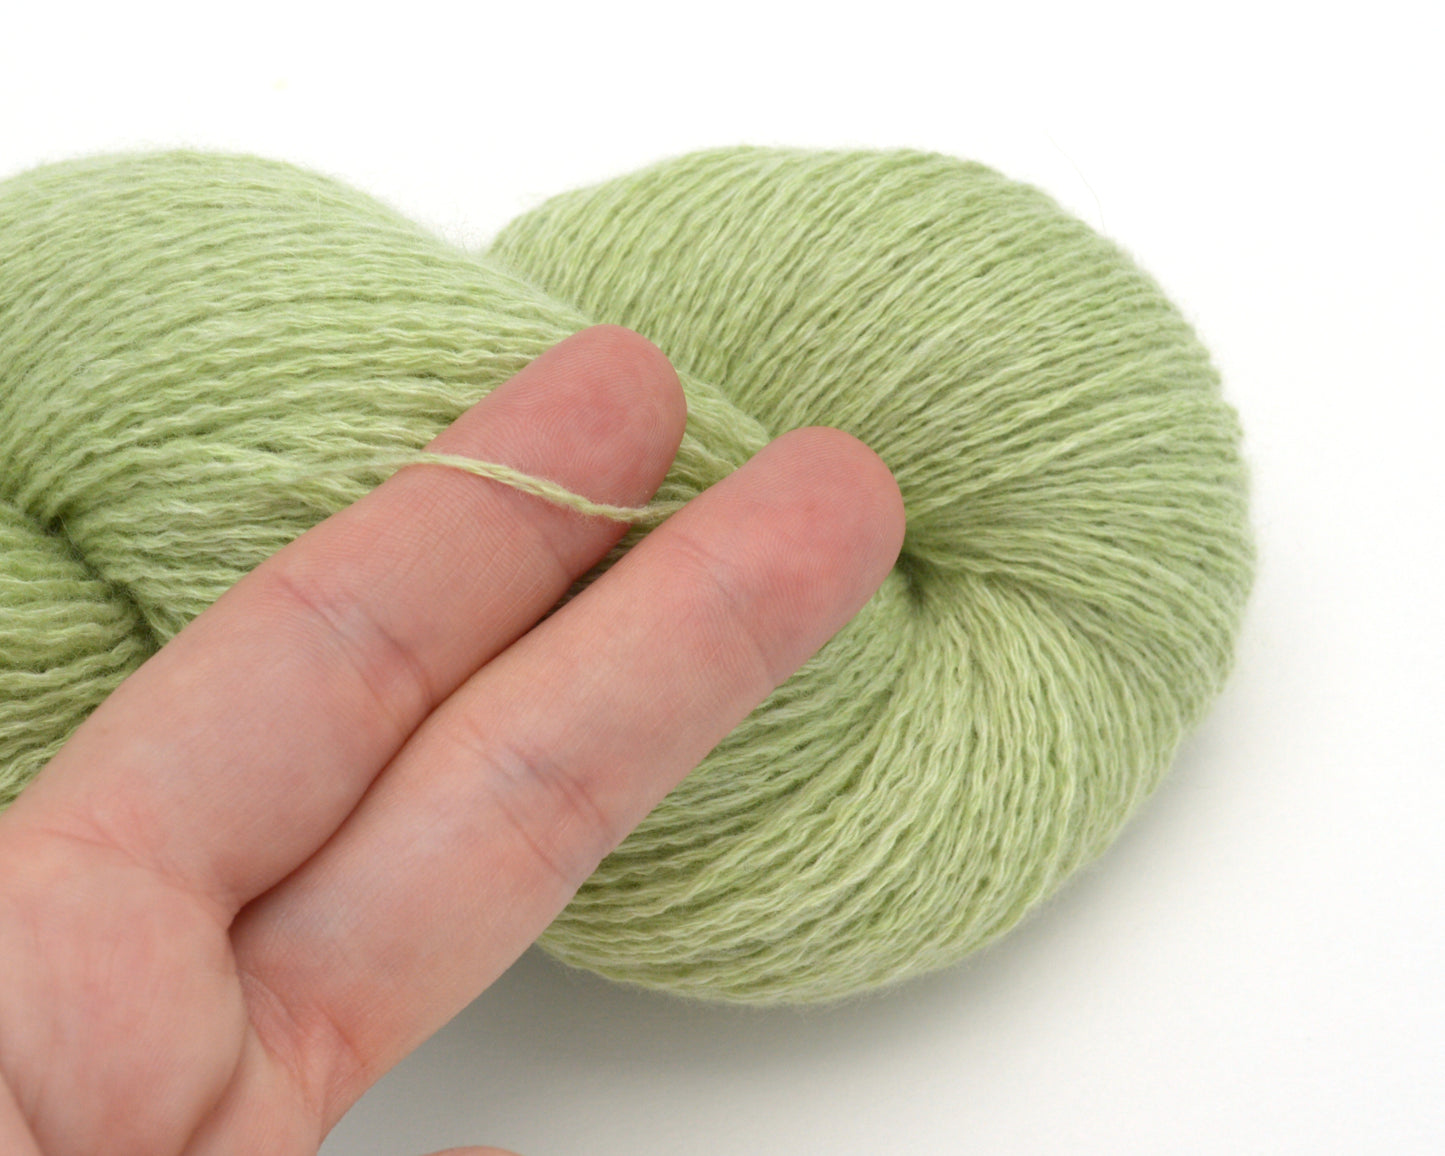 Heavy Lace Weight Recycled Cashmere Yarn in Key Lime Green